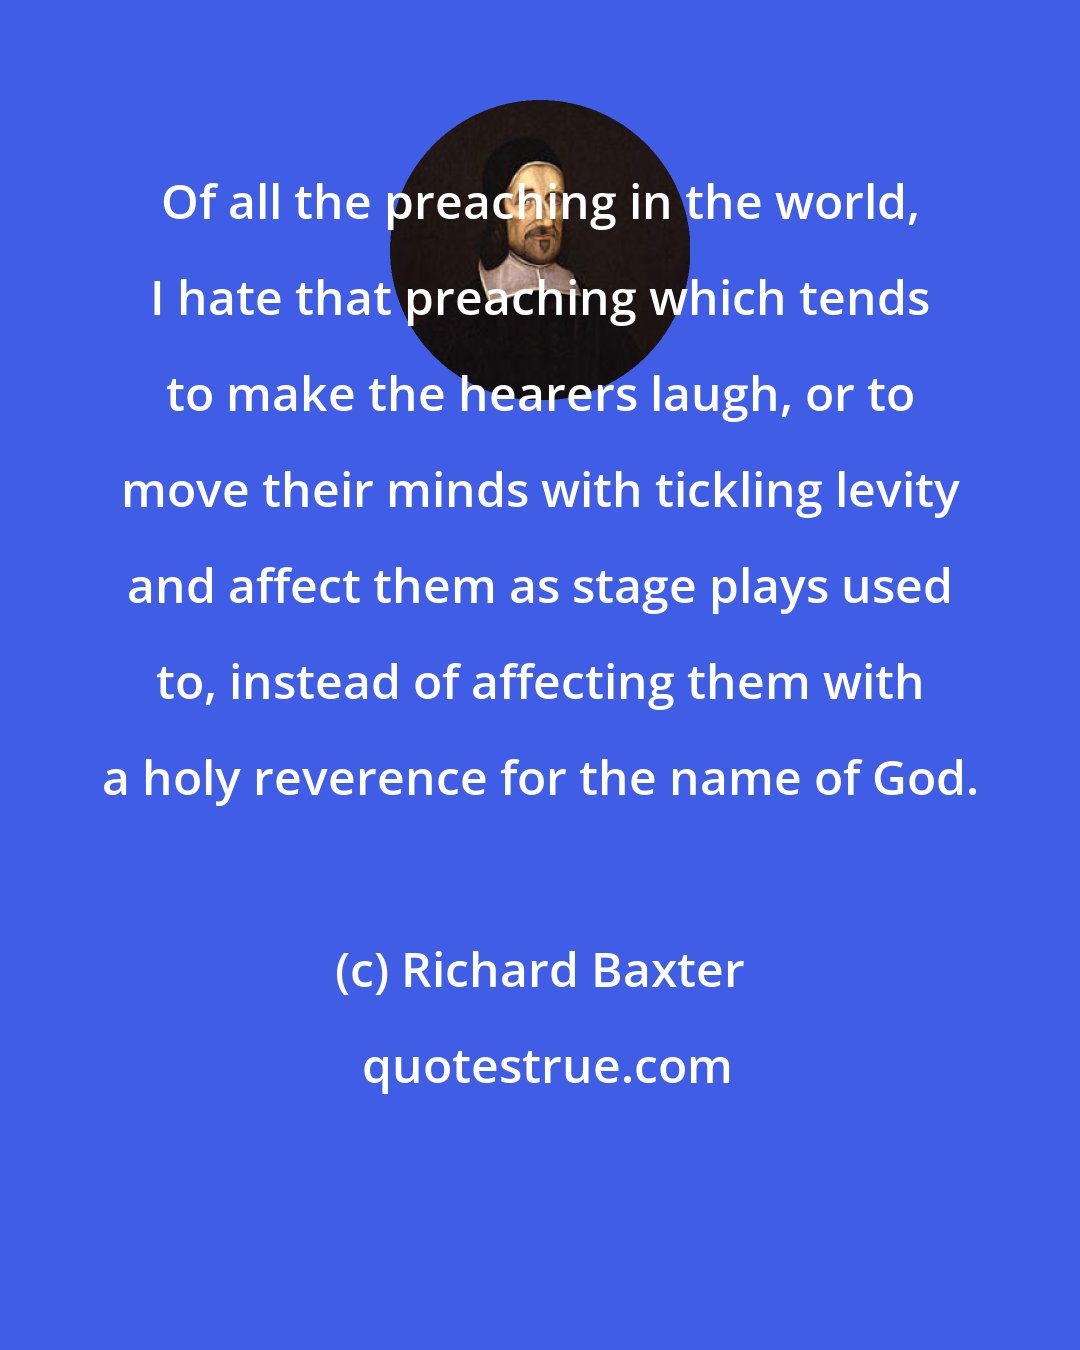 Richard Baxter: Of all the preaching in the world, I hate that preaching which tends to make the hearers laugh, or to move their minds with tickling levity and affect them as stage plays used to, instead of affecting them with a holy reverence for the name of God.